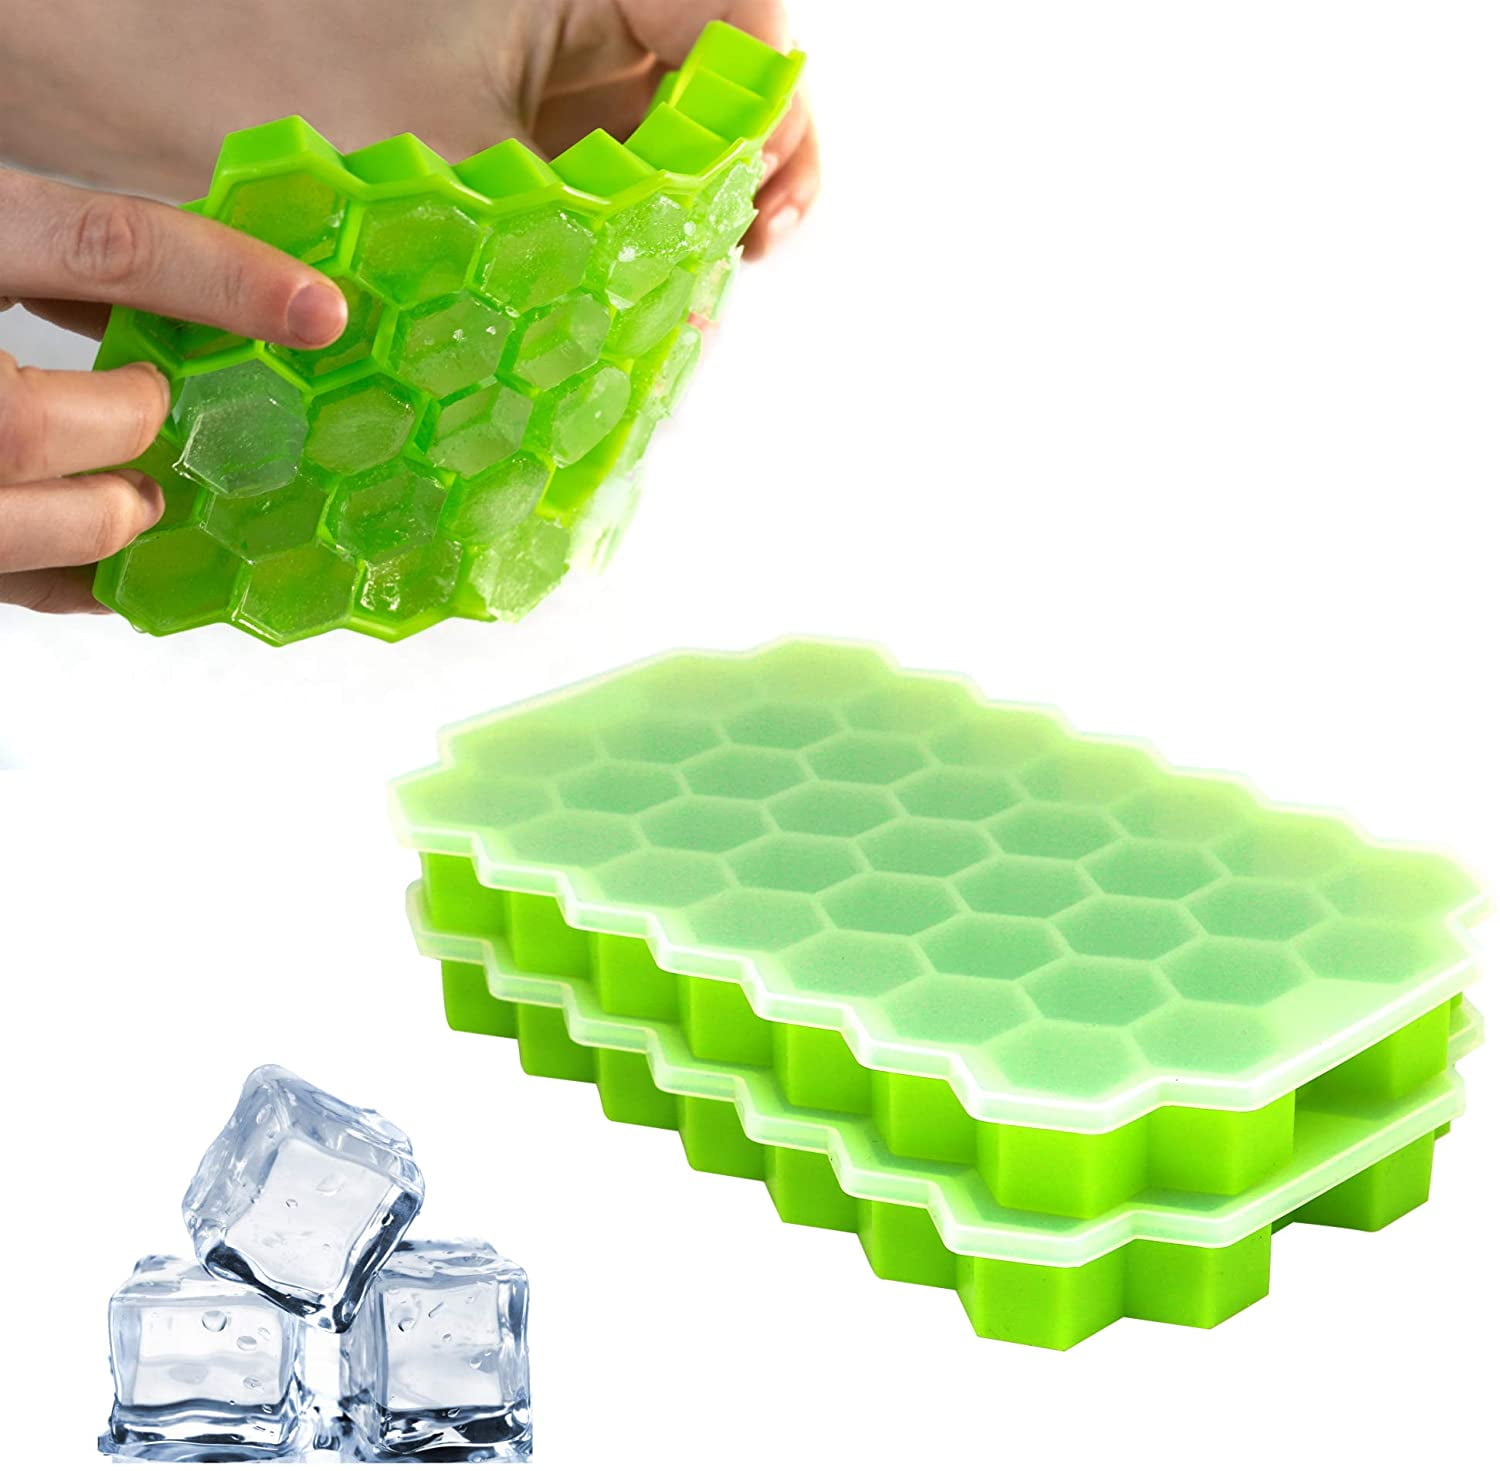 Handy Housewares 2 Jumbo Silicone Push Ice Cube Tray - Makes 8 Large Cubes  - Teal Green 